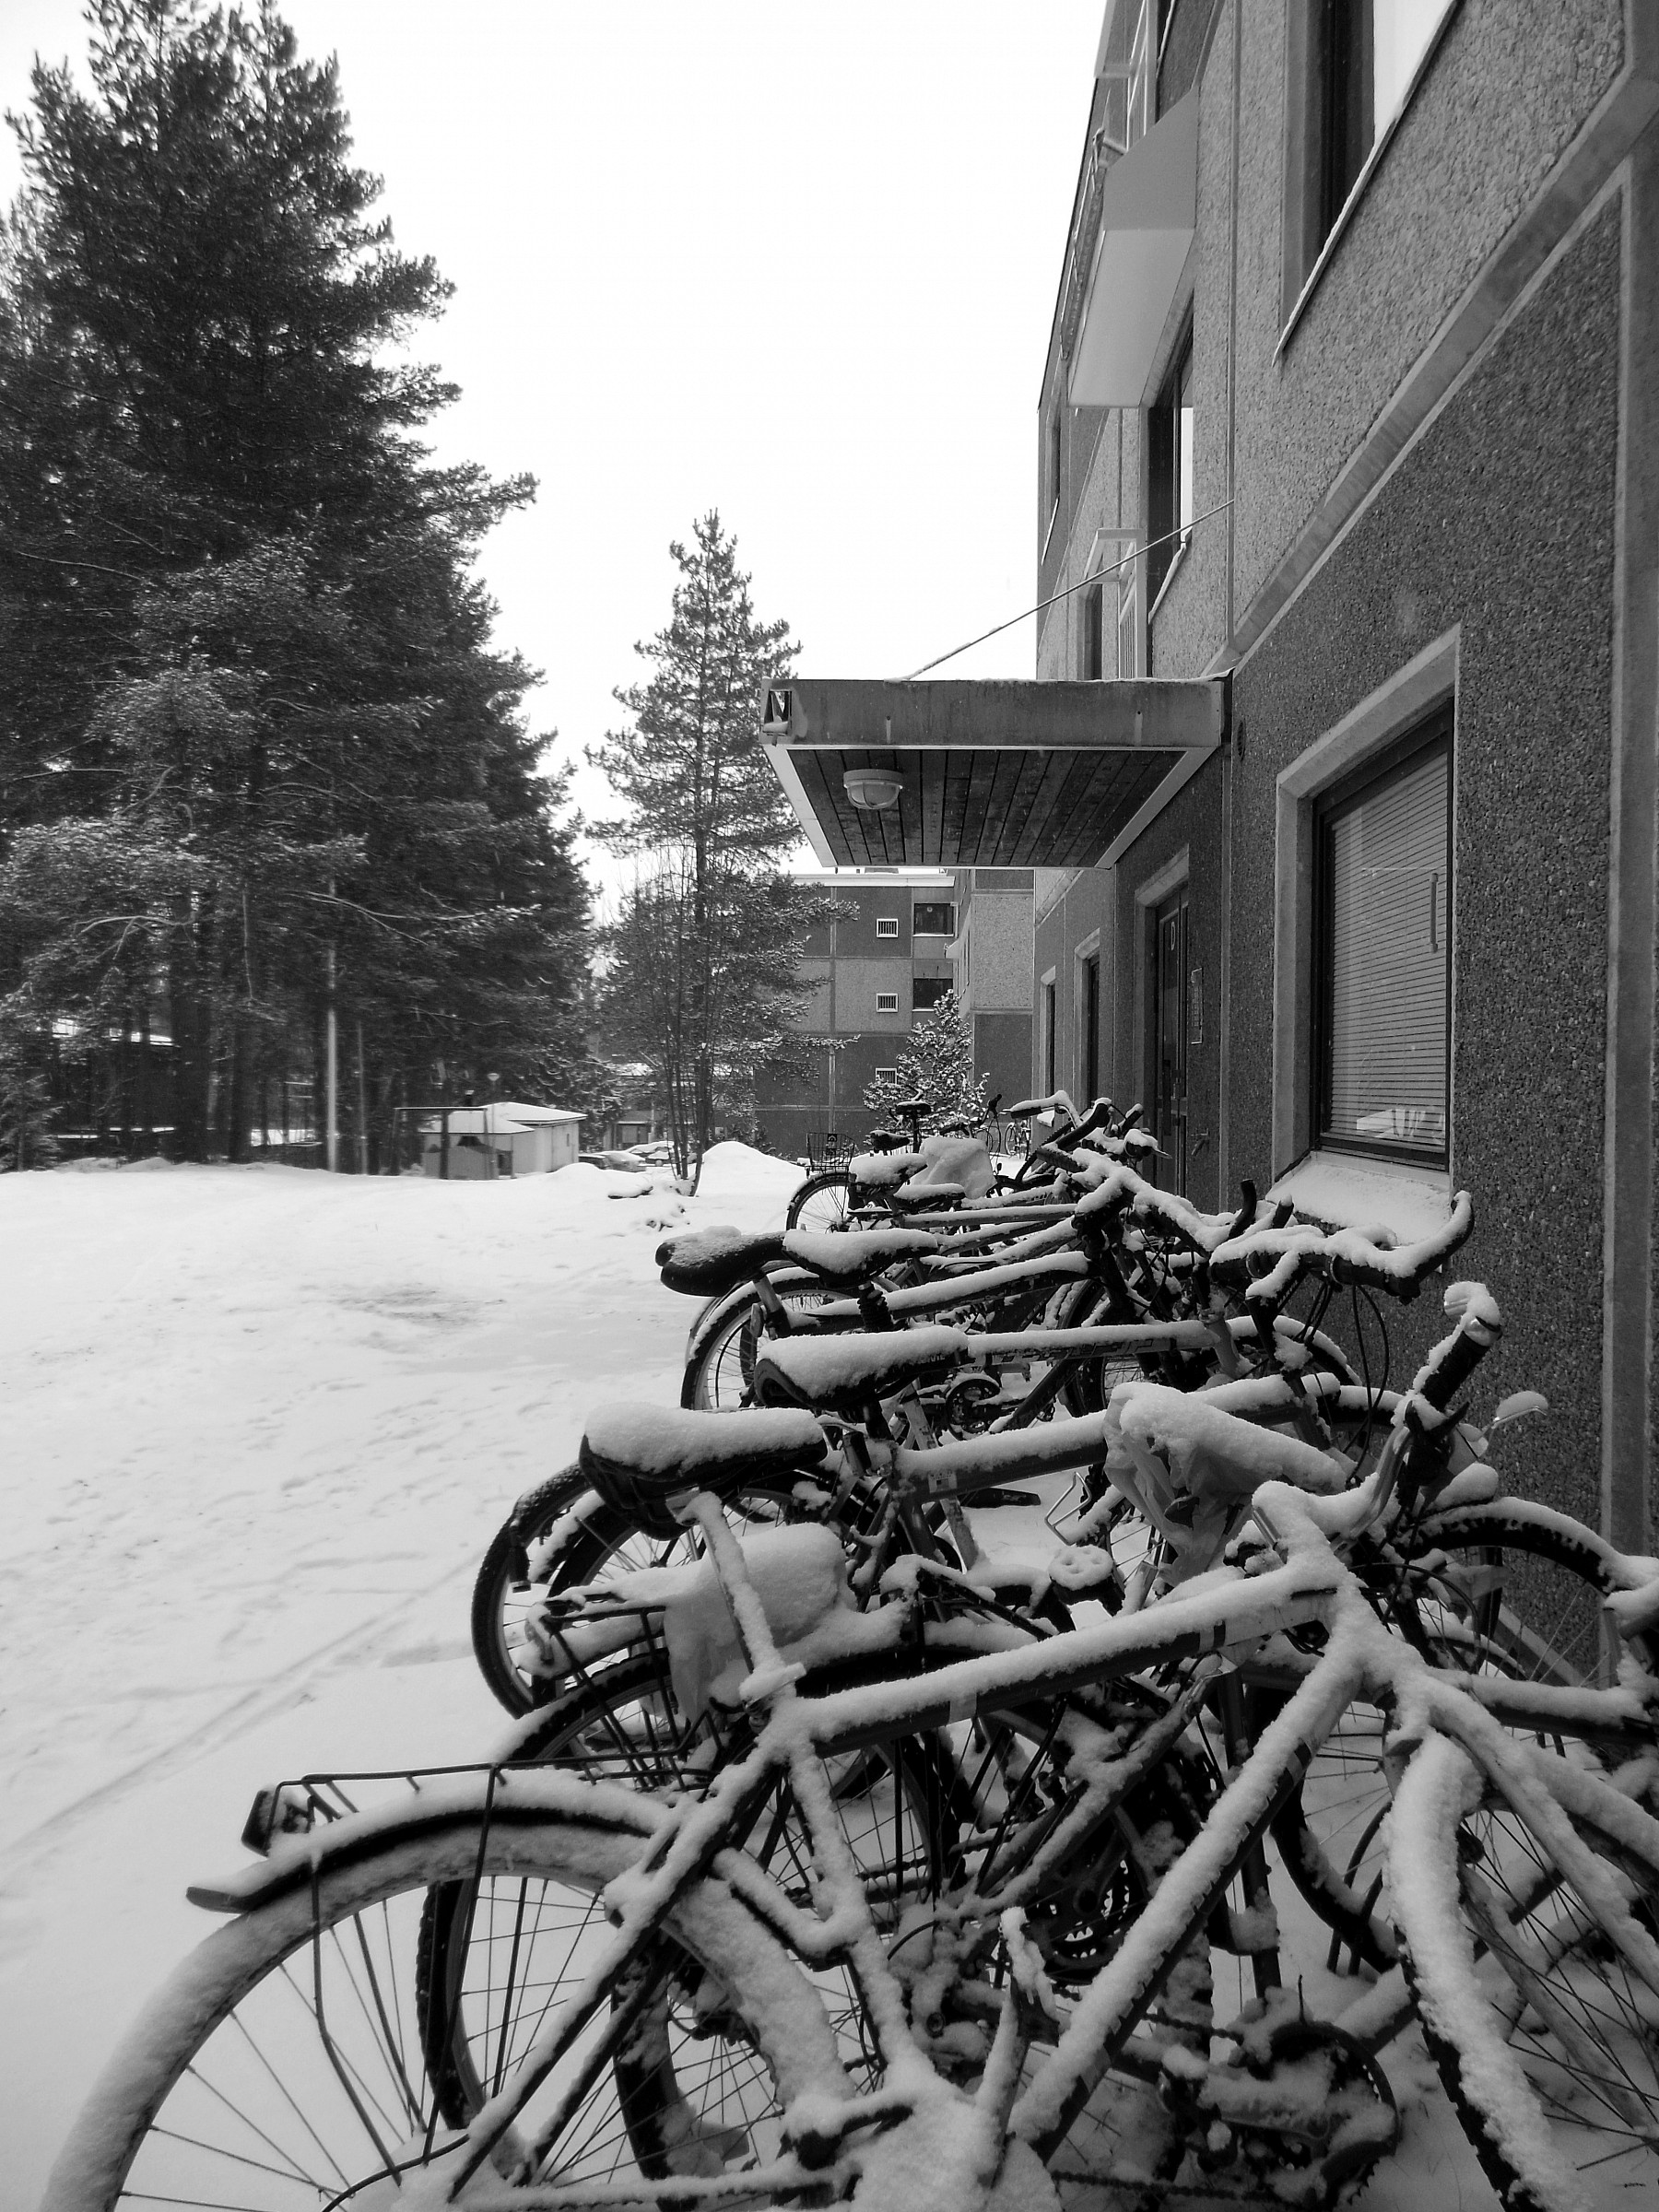 Bikes that are not afraid of the snow...